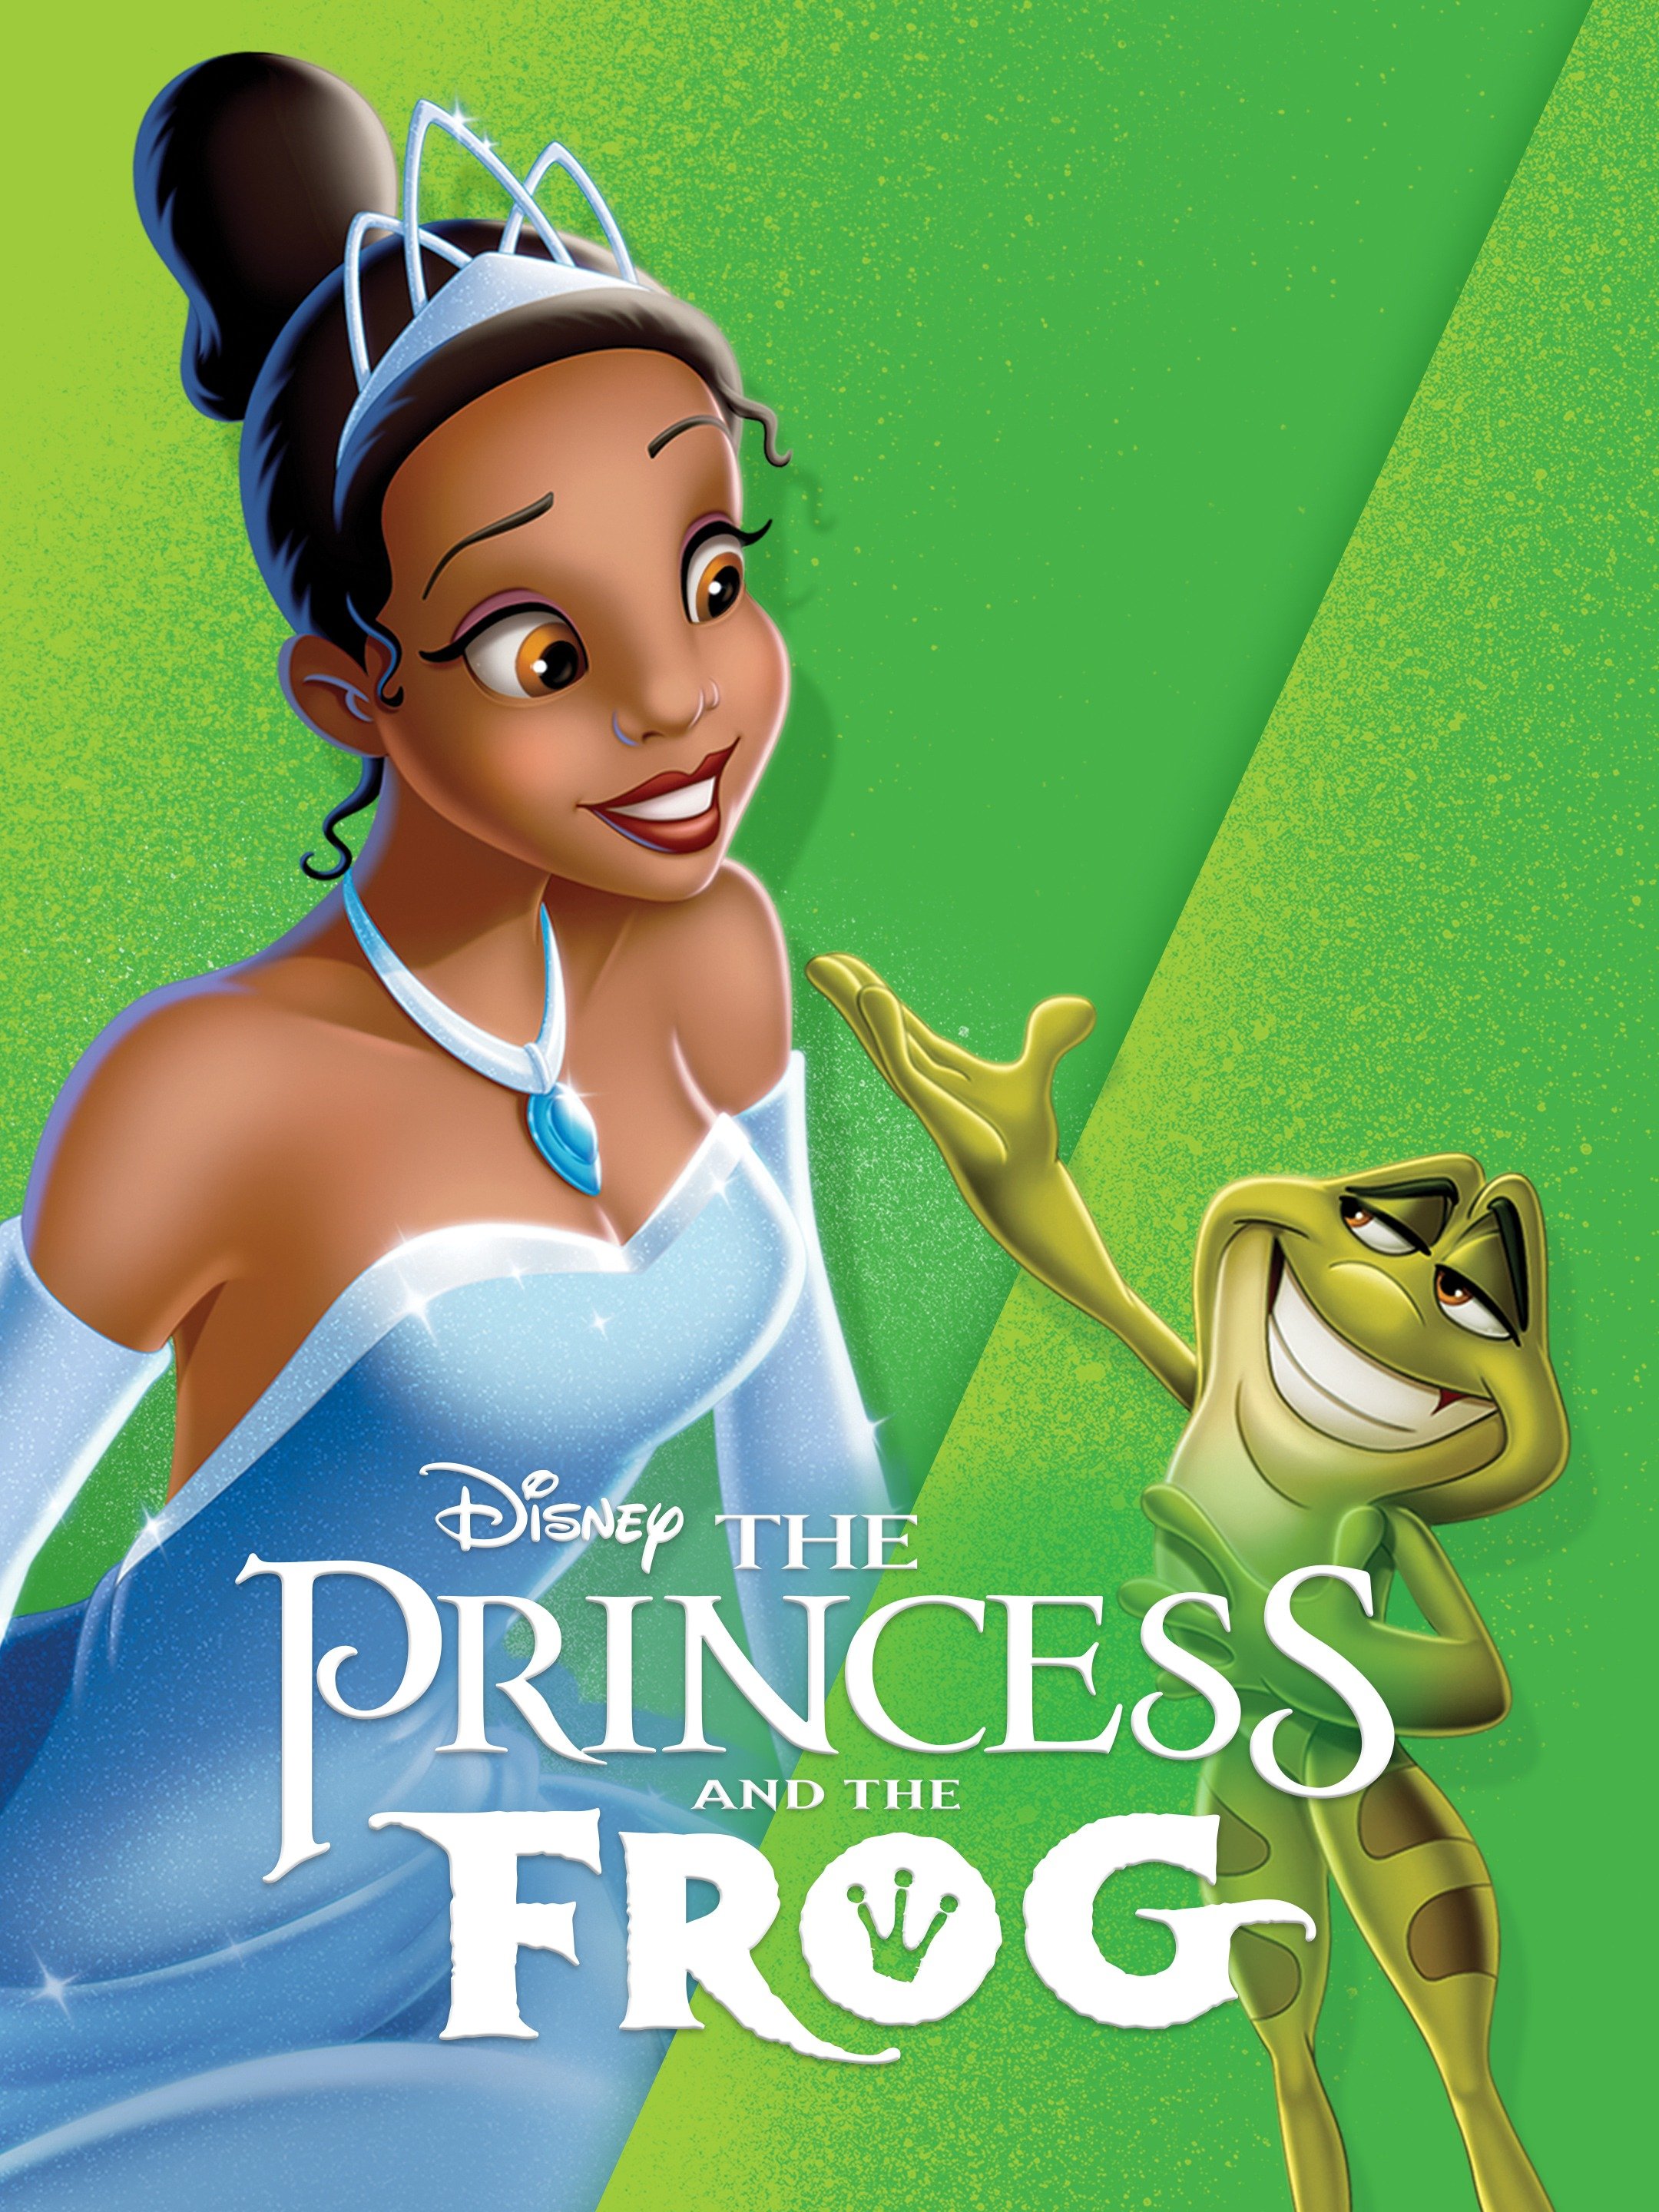 Download The Princess And The Frog 2009 Rotten Tomatoes